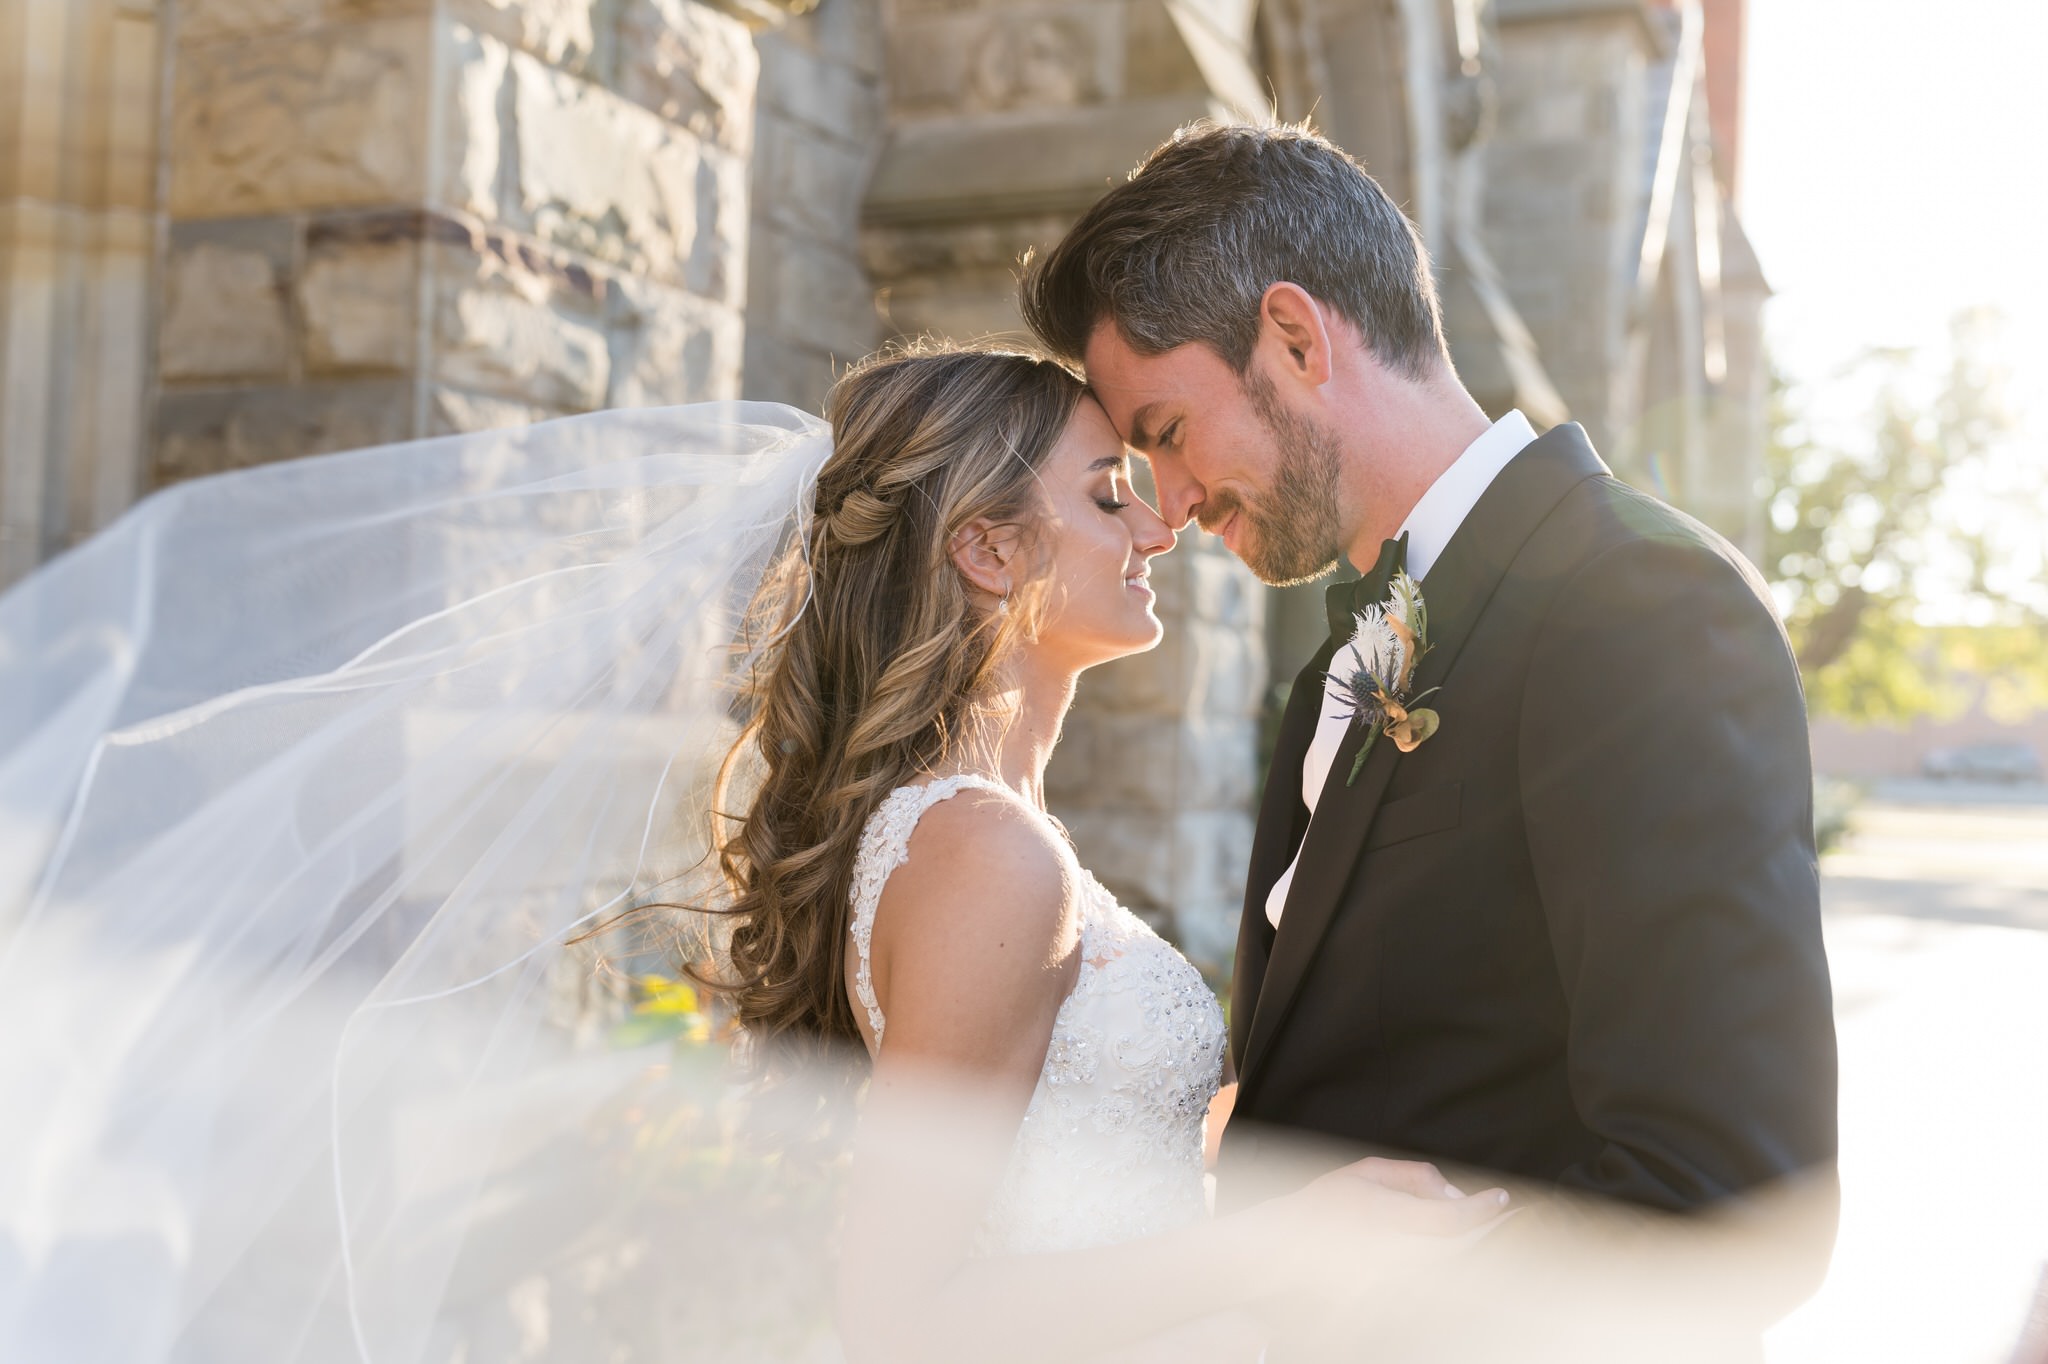 A bride and groom stand forehead to forehead as her veil blows in the wind, passing in front of the camera.